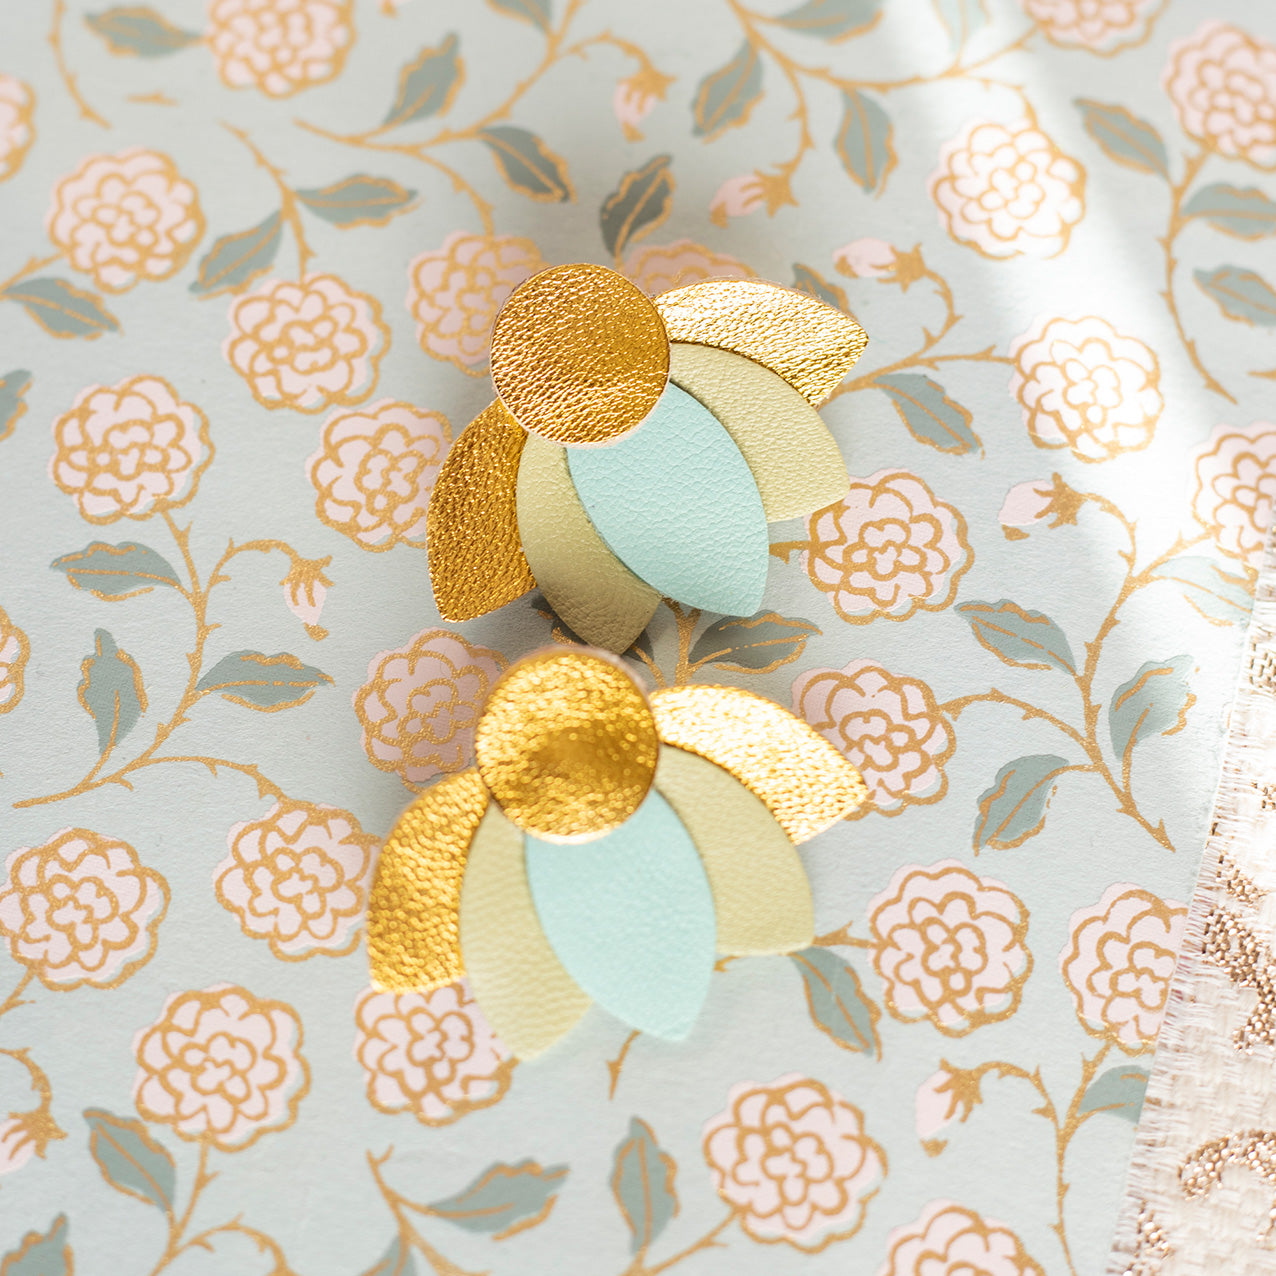 Large Lotus Flower stud earrings - light turquoise, pistachio green and gold